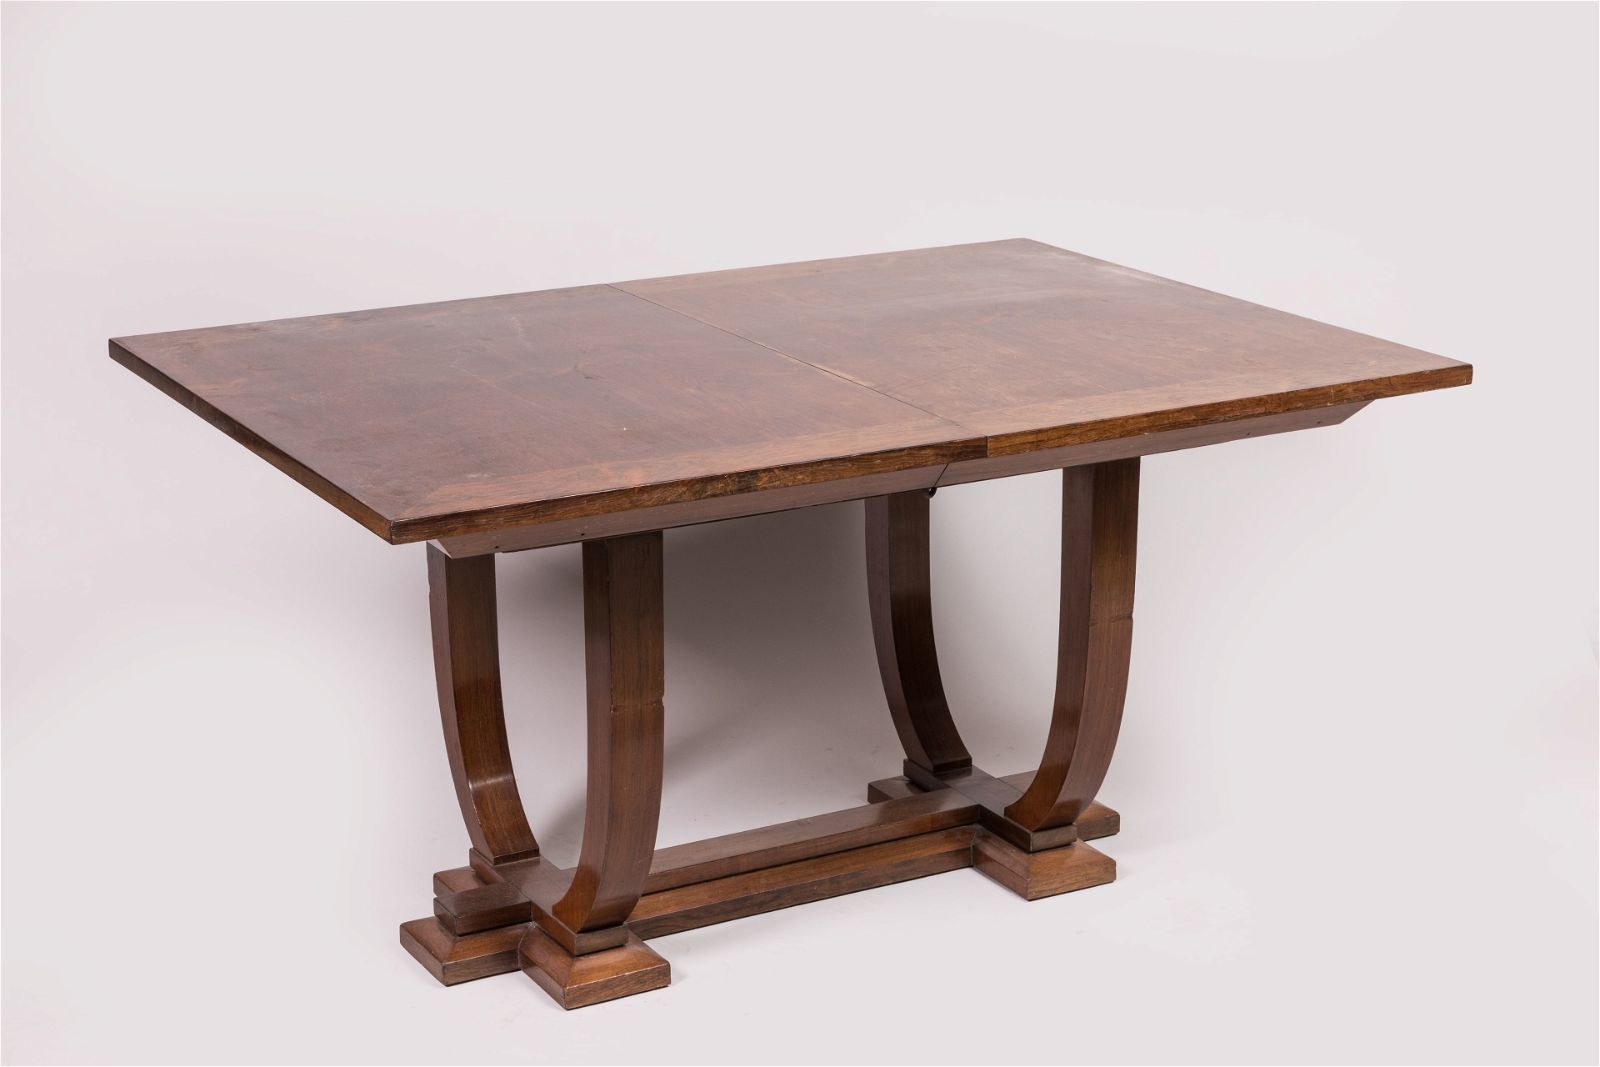 Pierre Chareau extending dining table, model MA788, which sold for €32,700 ($35,410) with buyer’s premium at Valoir Pousse-Cornet.